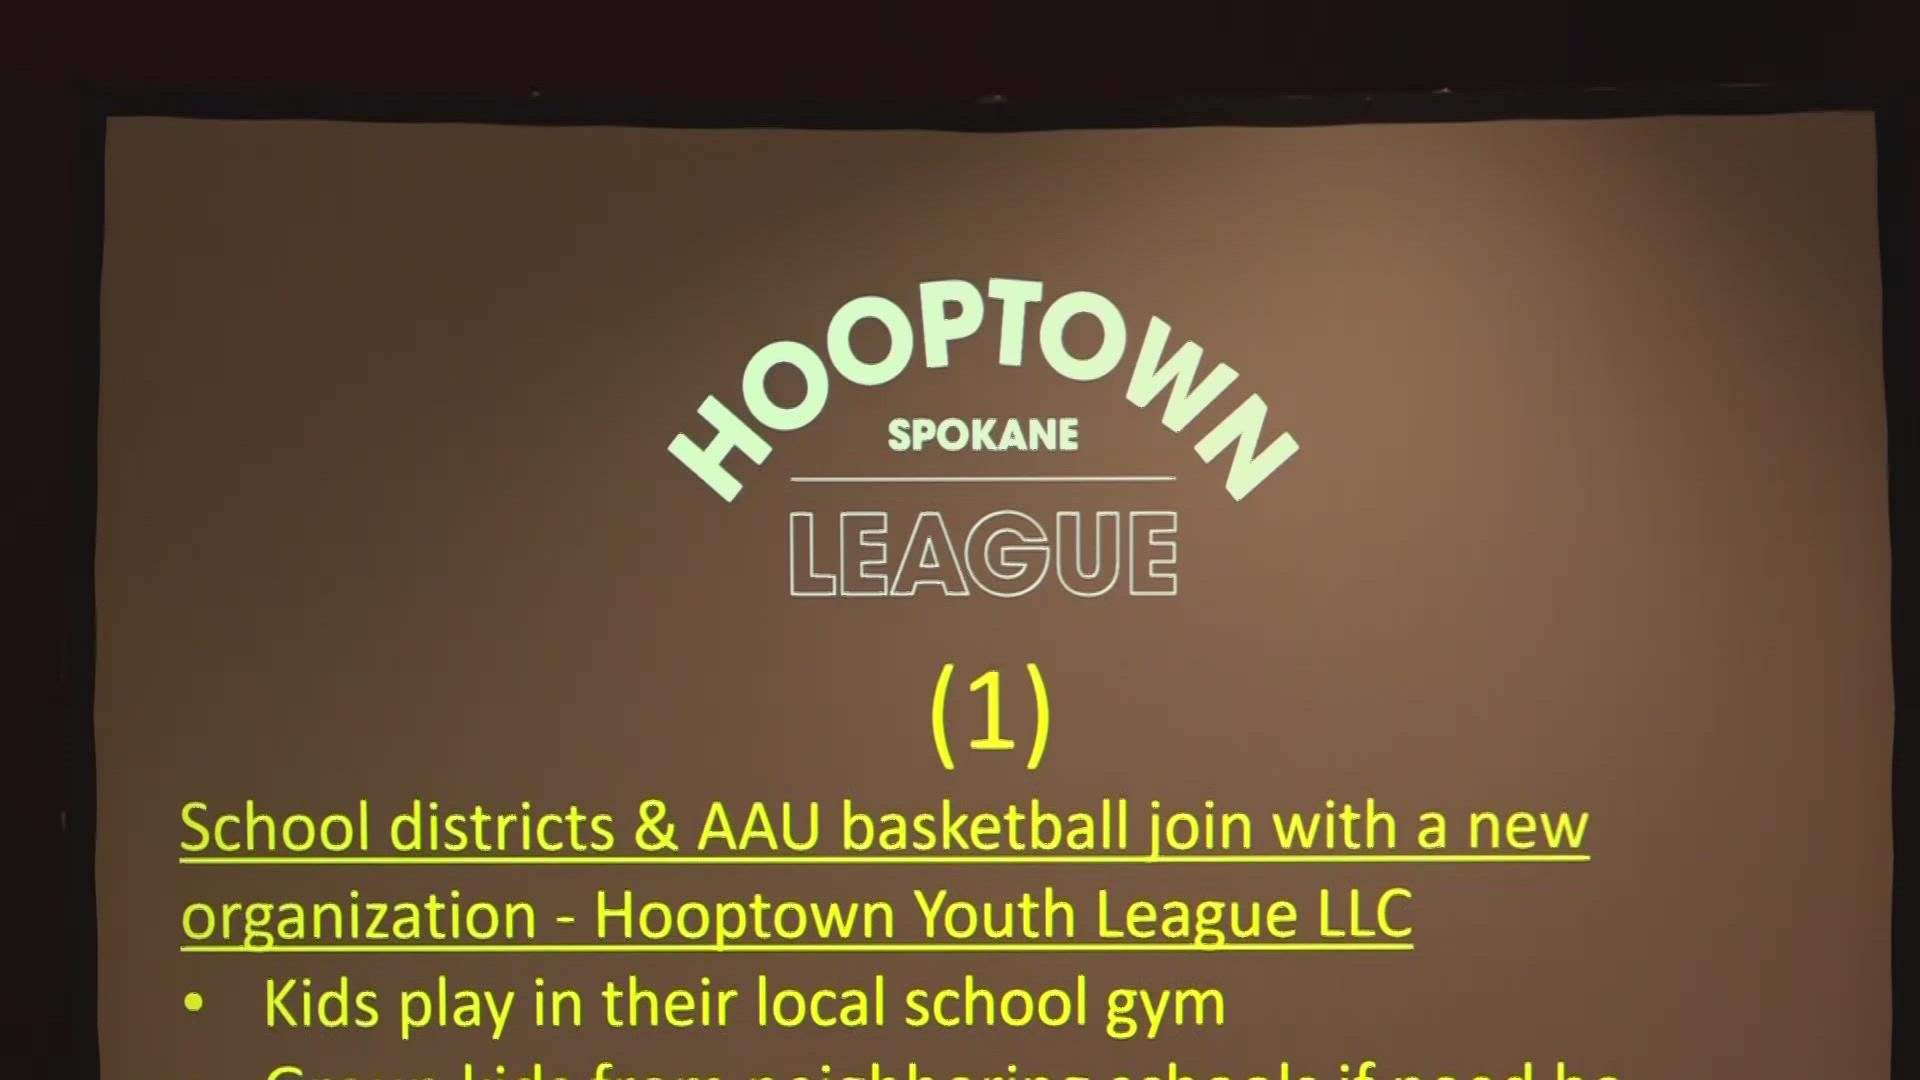 Spokane Hoopfest executive director Riley Stockton said Hooptown Youth League, LLC. will reinvigorate youth participation in basketball.